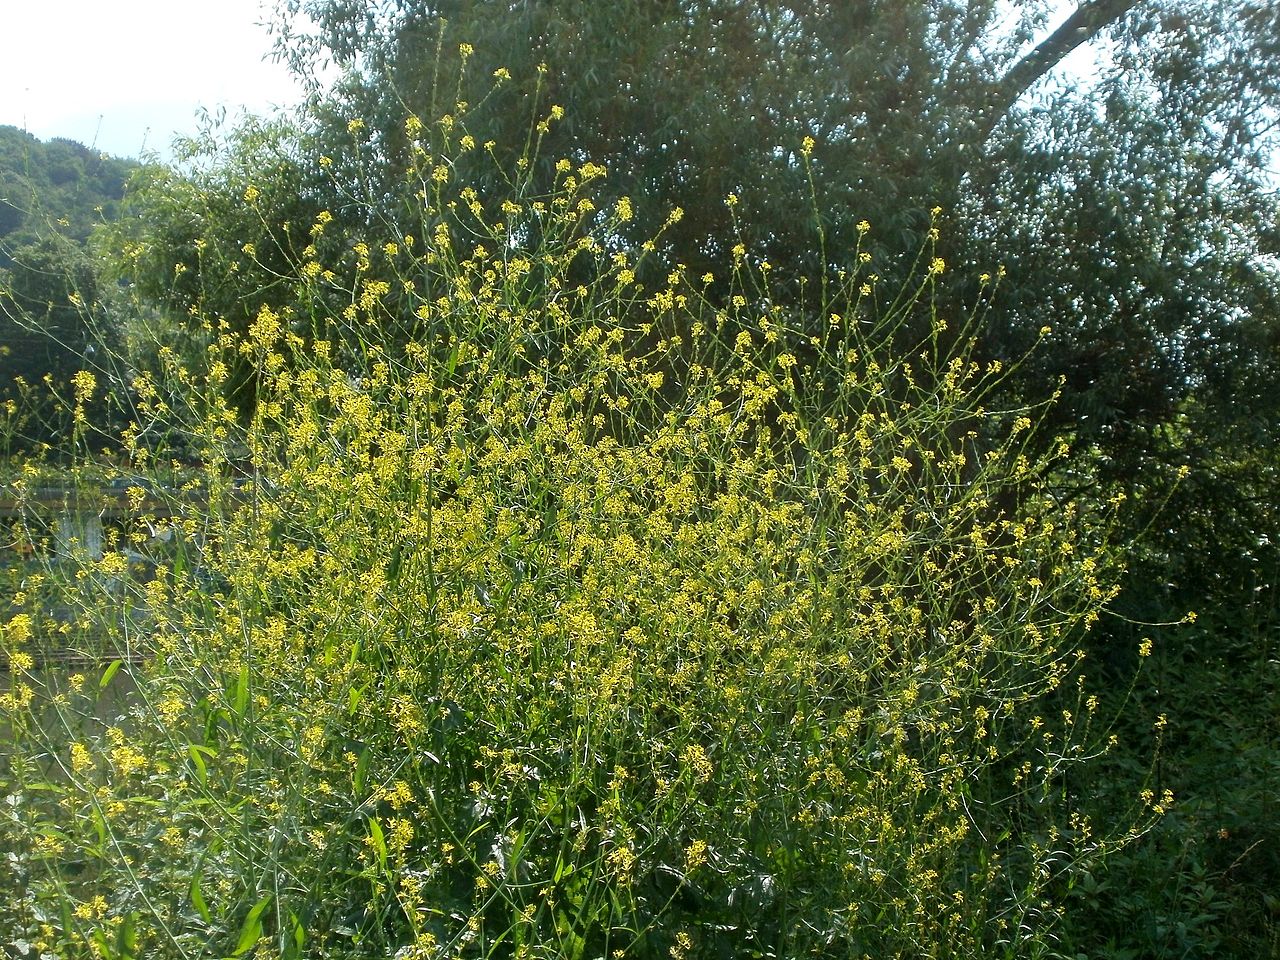 Black mustard (Brassica nigra) is an annual herbaceous plant that originated in the Middle East